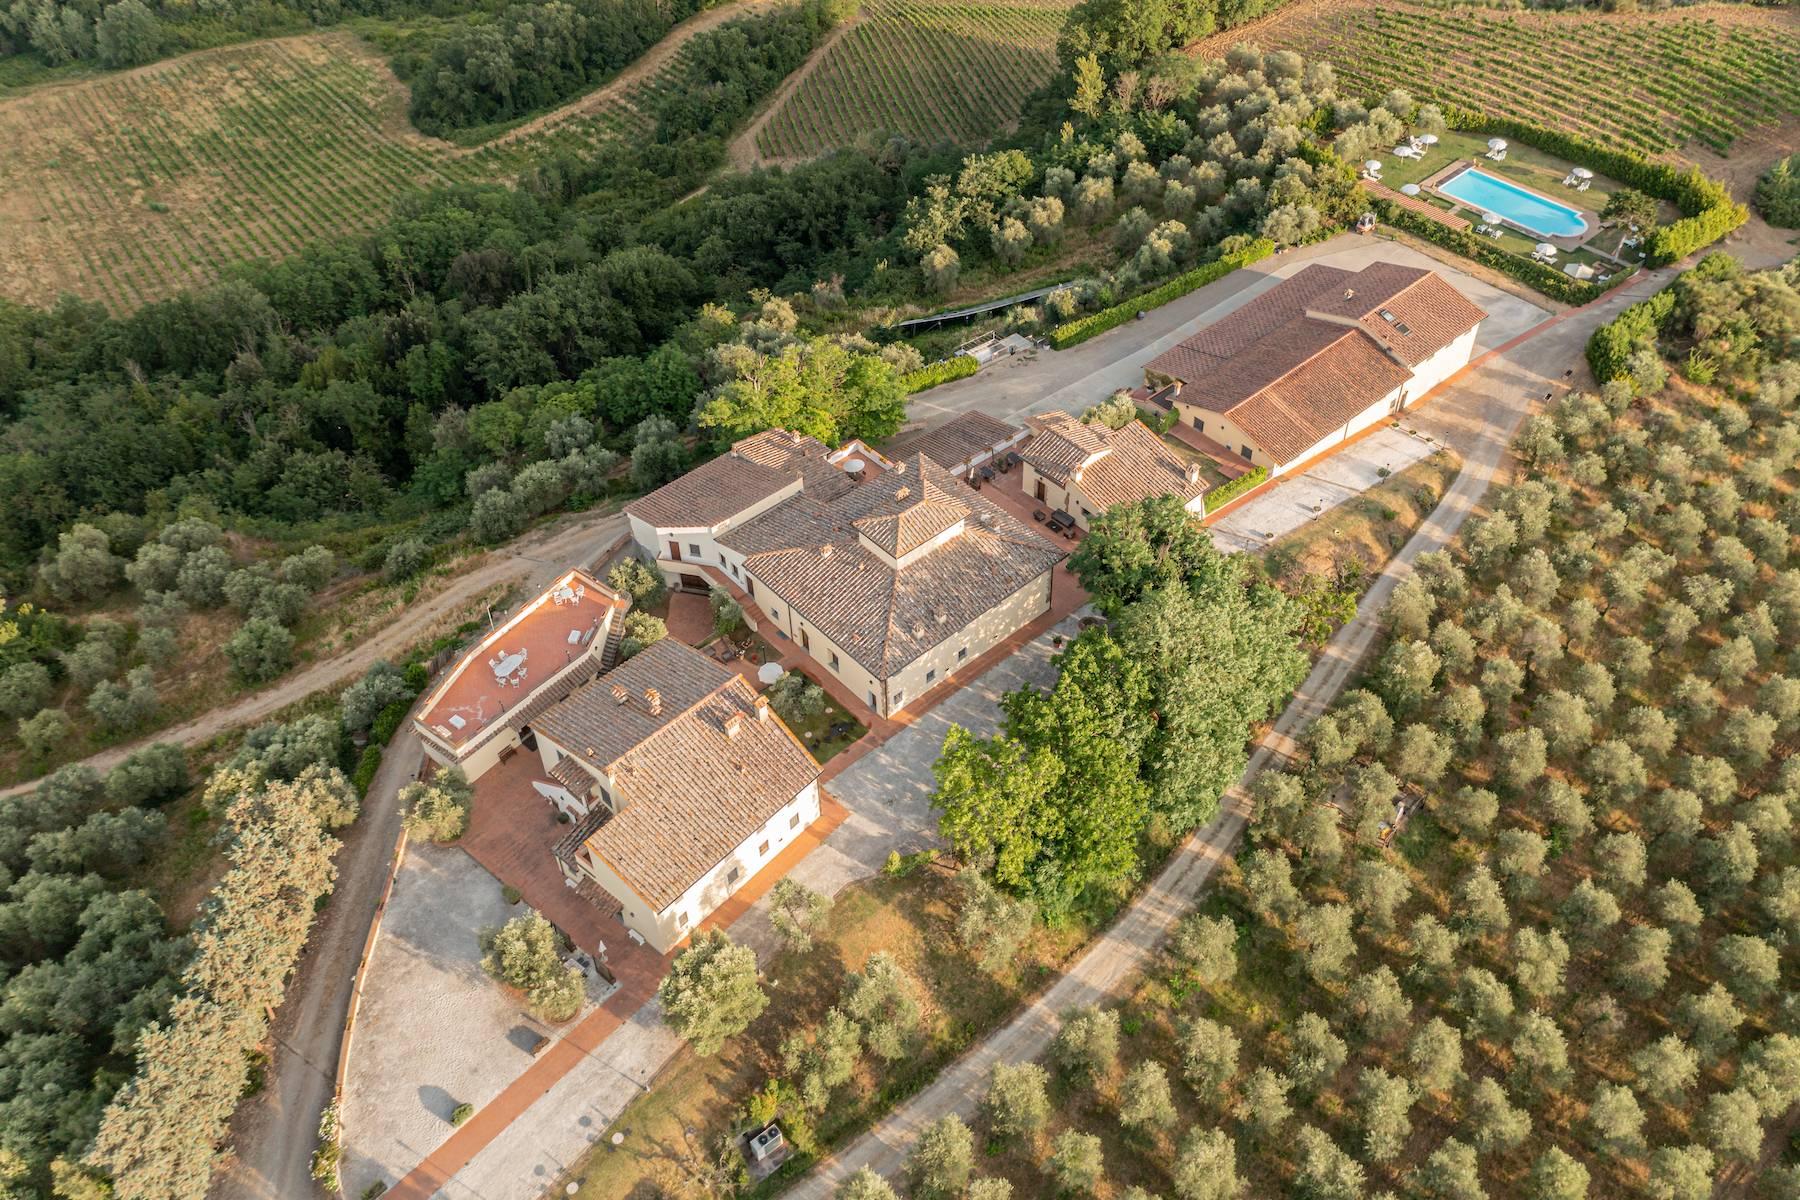 Remarkable 102 hectares wine estate in the heart of Chianti - 2